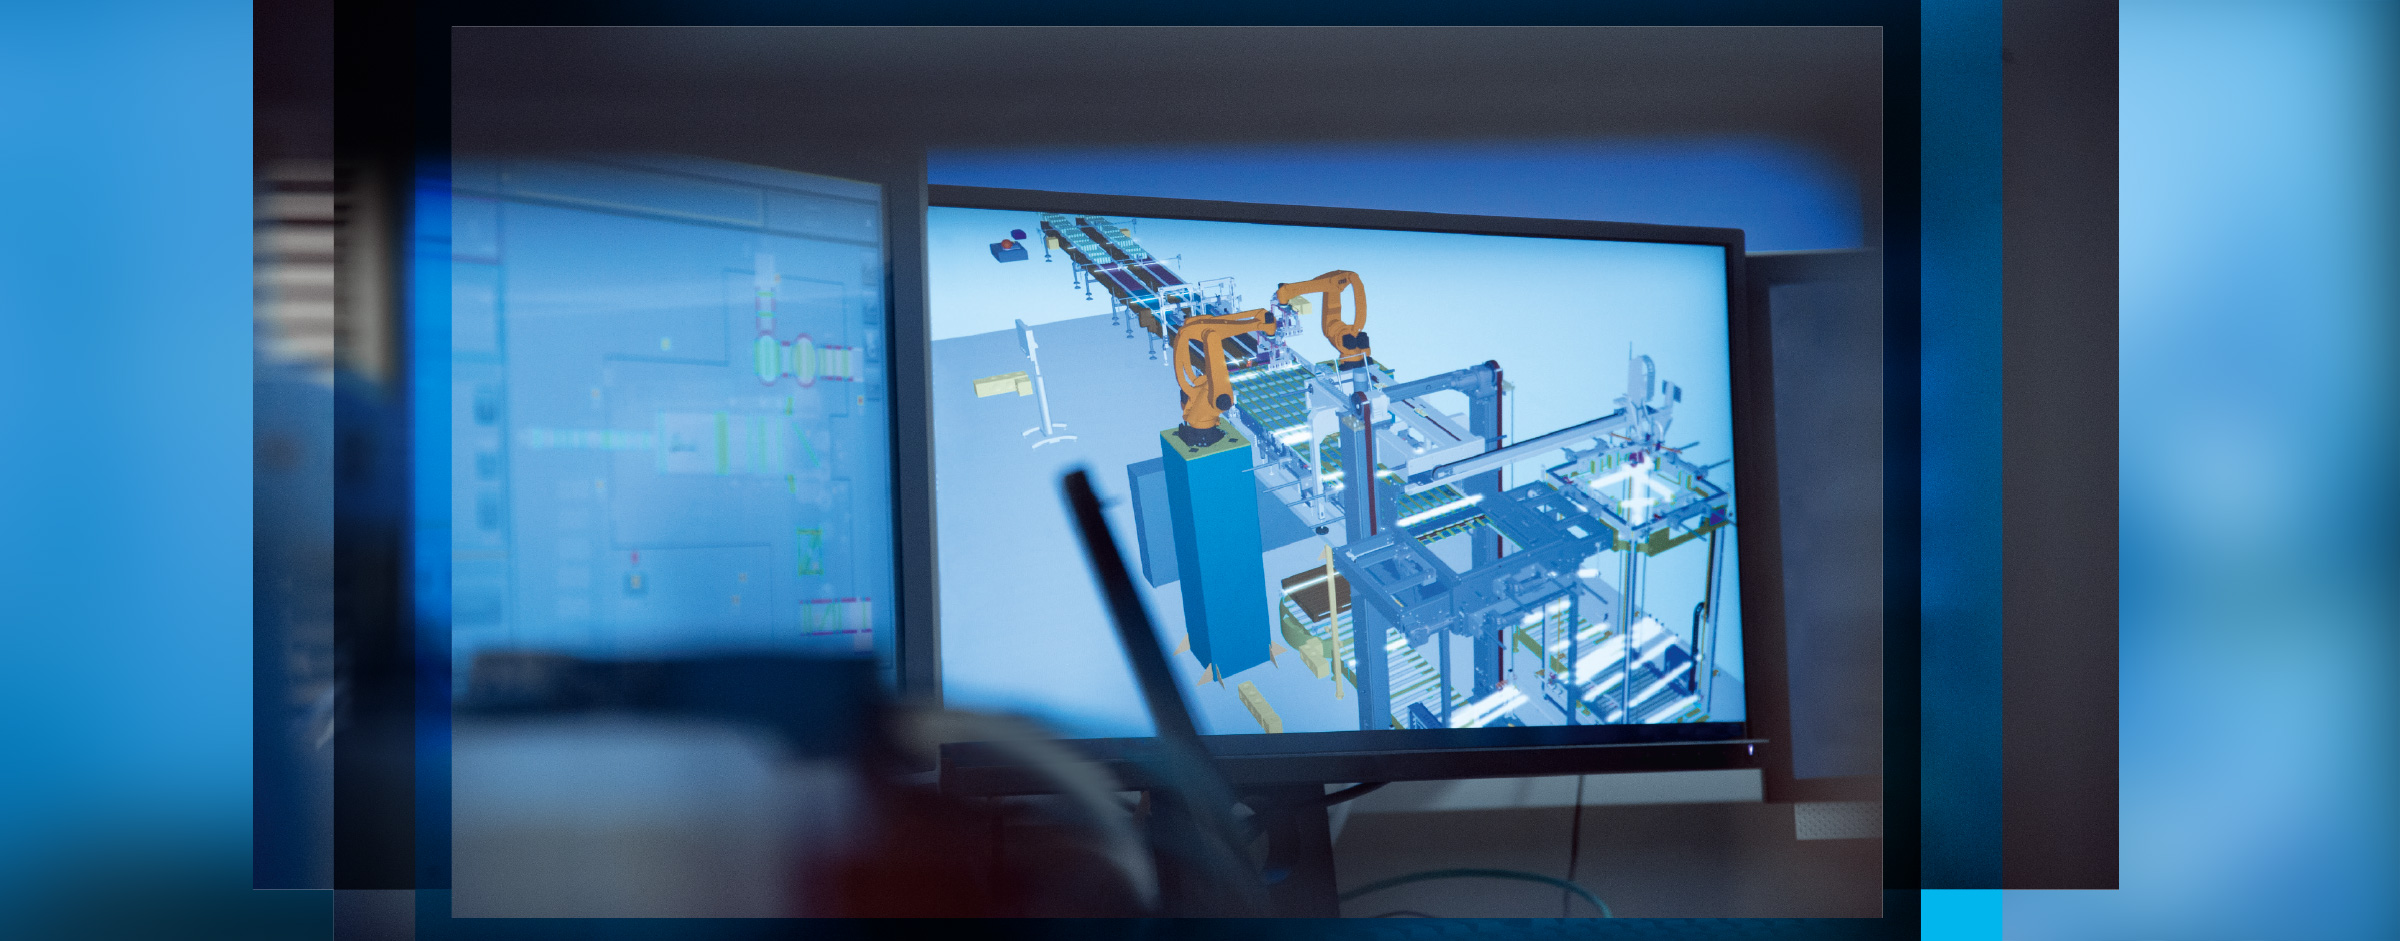 Digital twin: KHS lowers fault-related costs with virtual machine commissioning